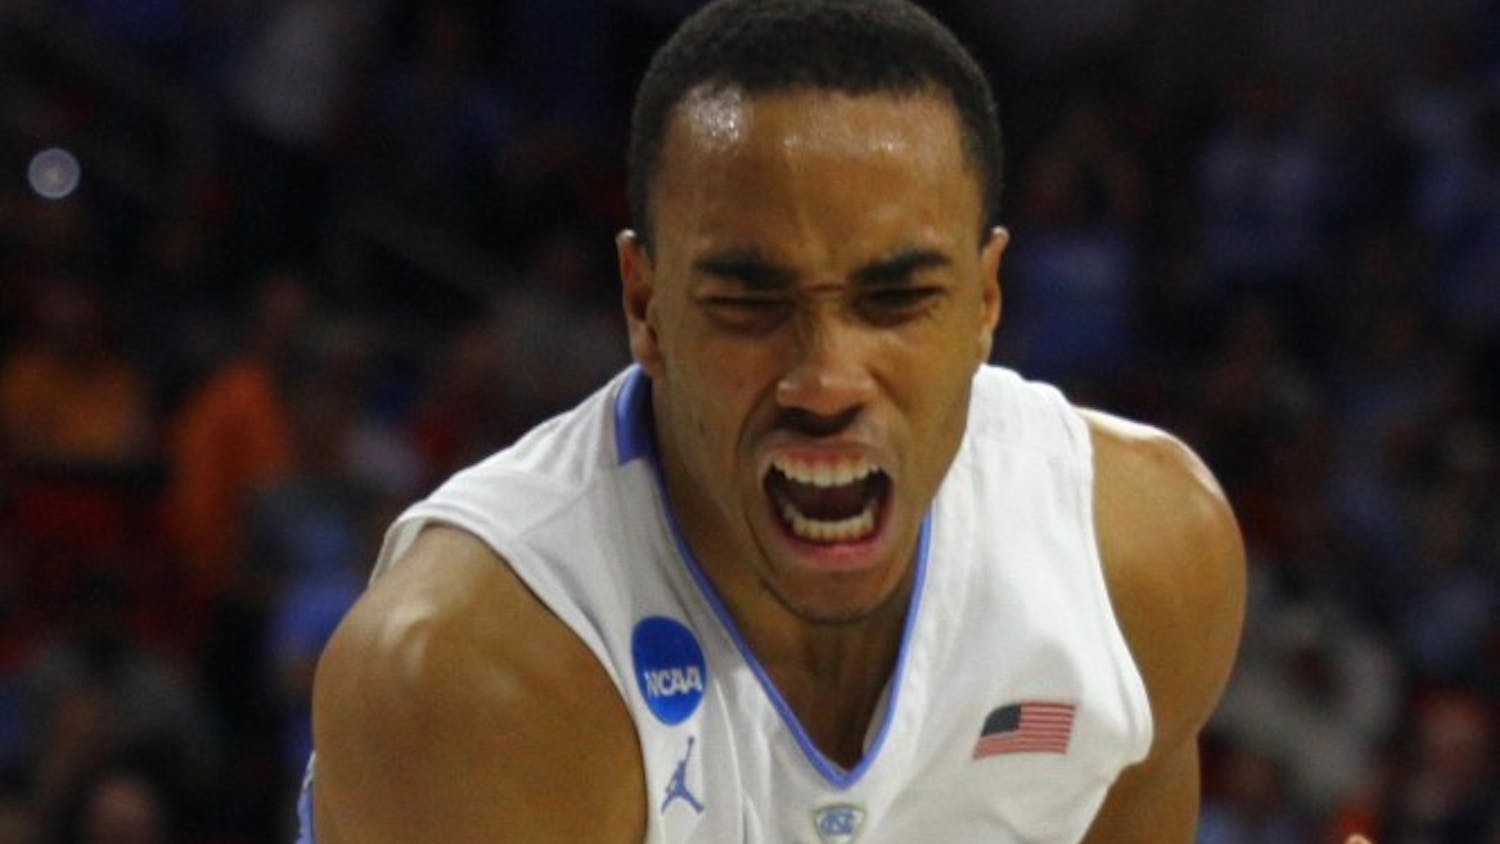 Senior Brice Johnson reacts after scoring during the second half.